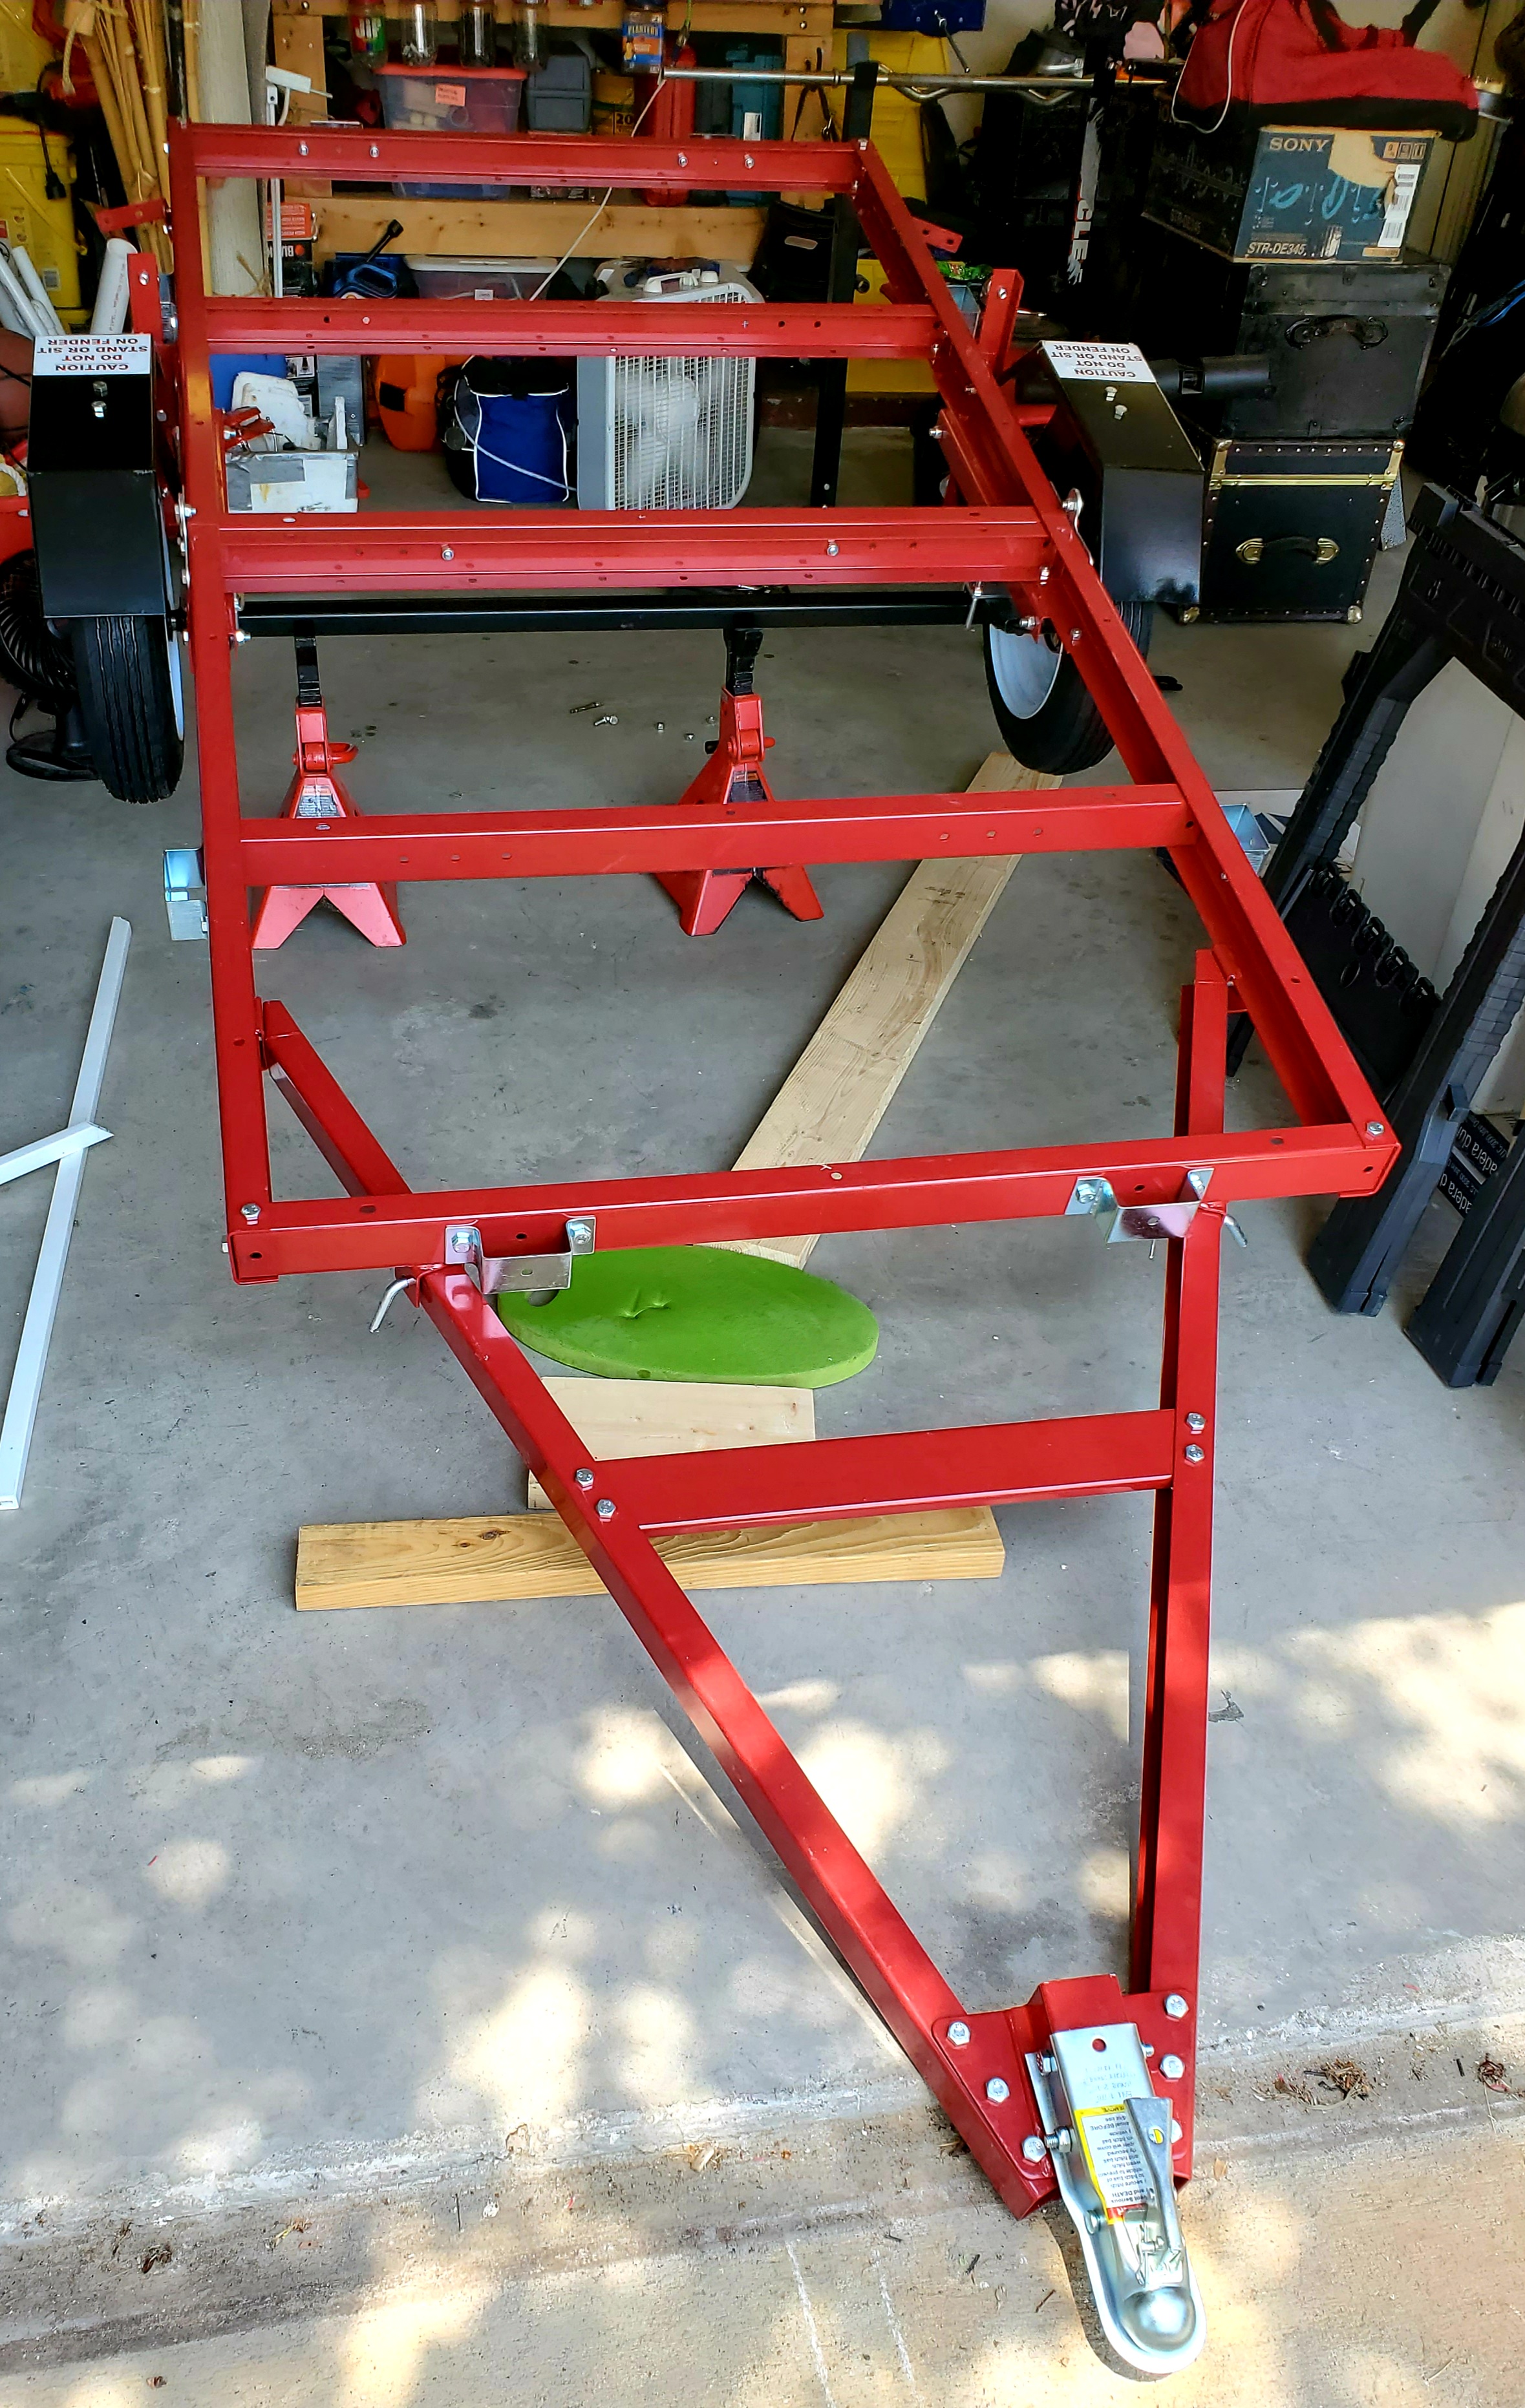 Harbor Freight Super Duty Folding Trailer from Harbor Freight in the garage